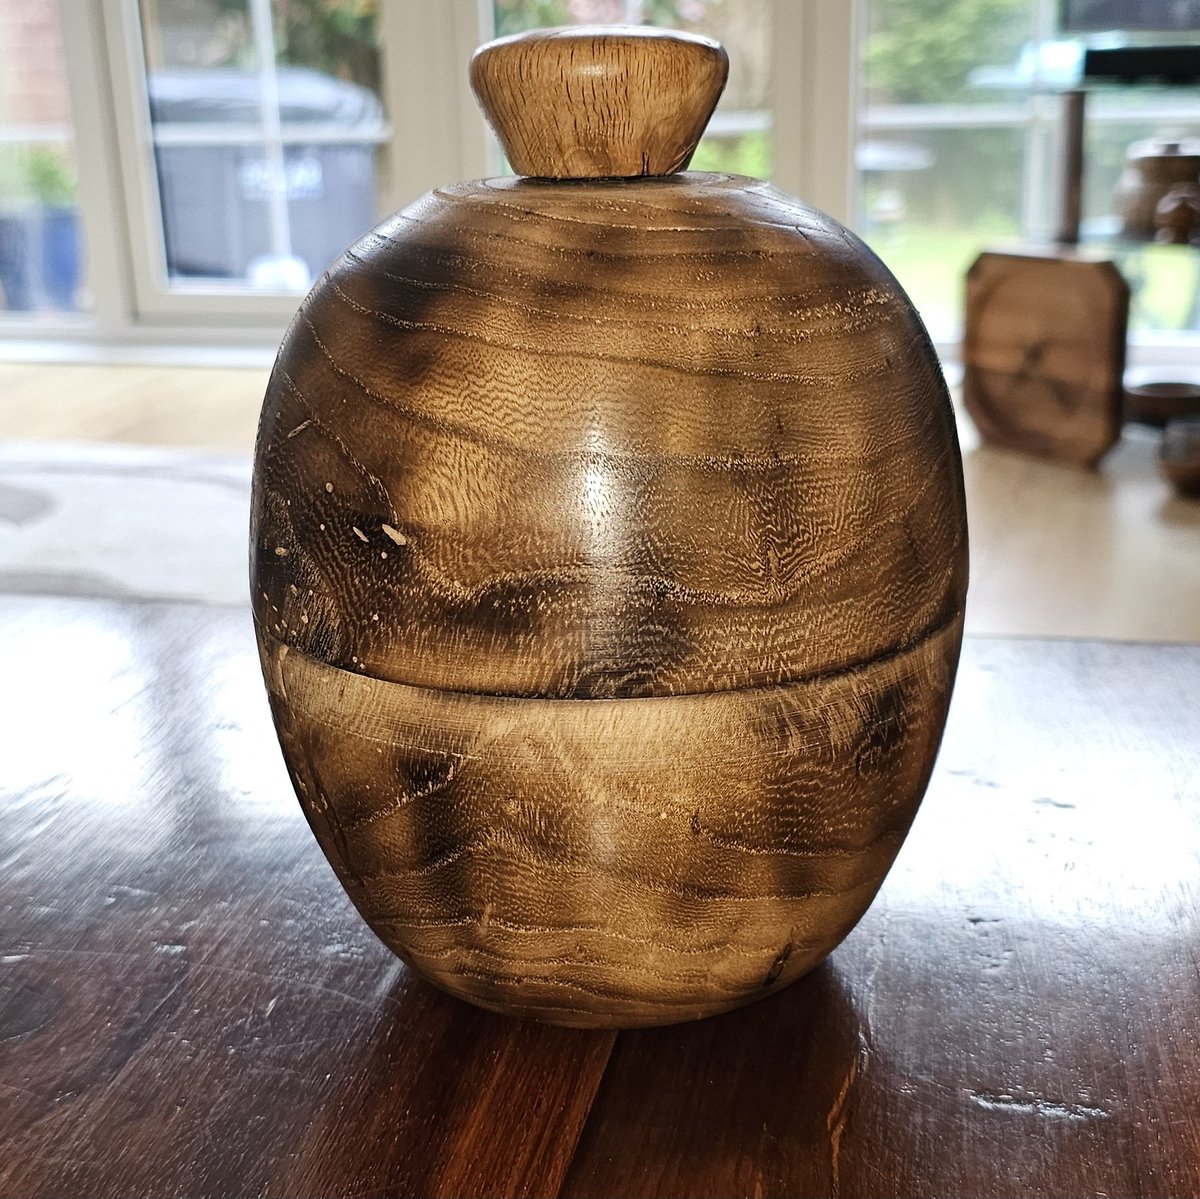 Dusty piece of elm from the back of the garage into a thing 😀 not sure what else to call it#Woodturning